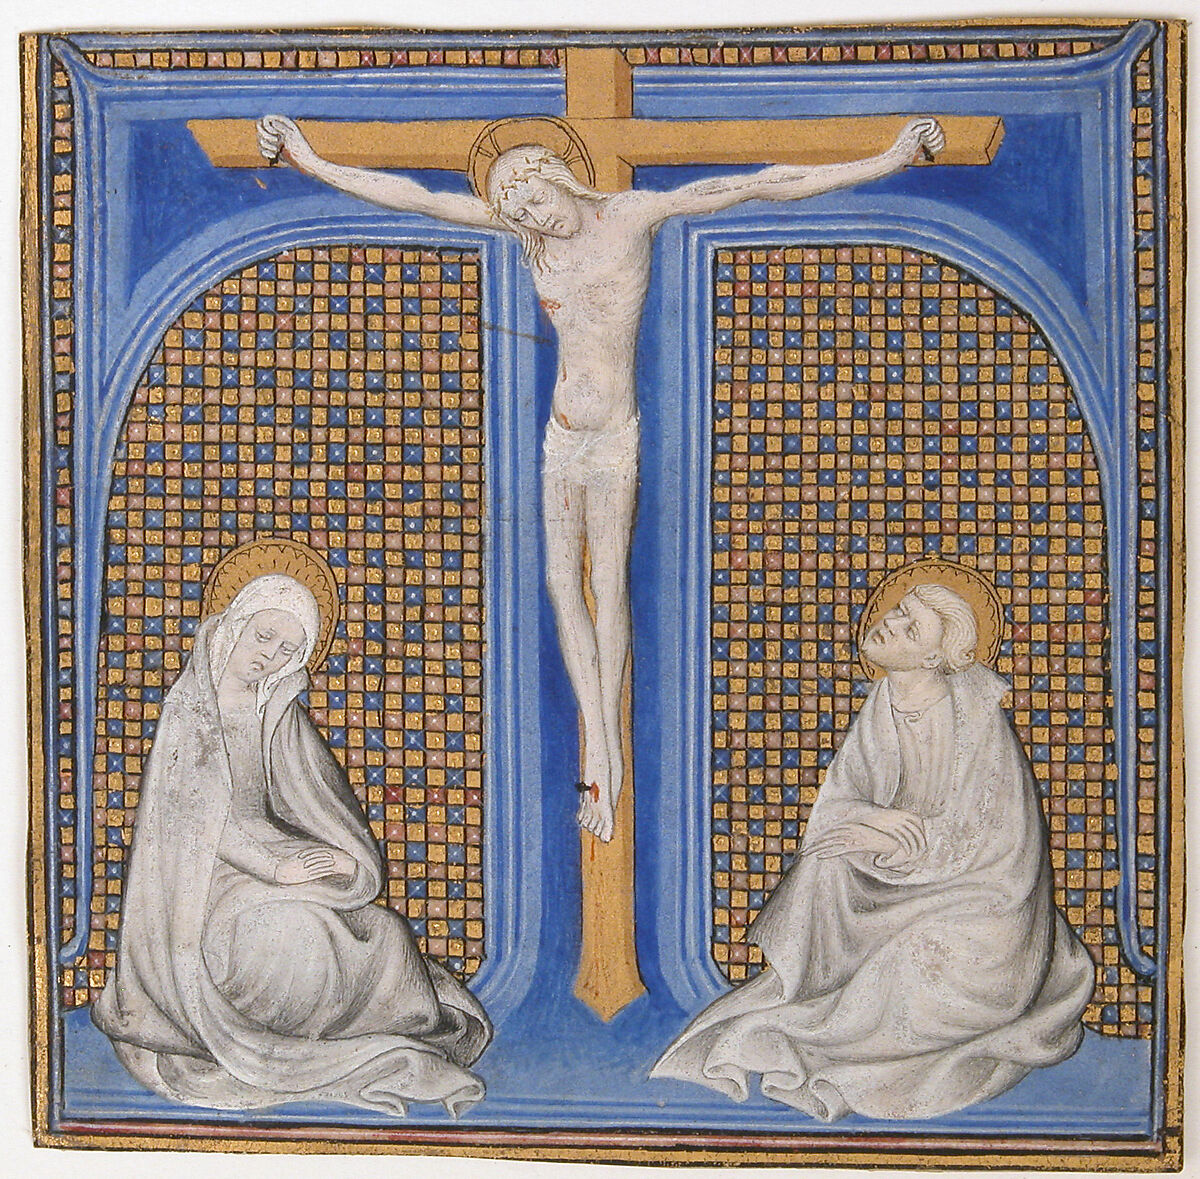 Manuscript Illumination with Crucifixion in an Initial T, from a Missal, Tempera, ink and gold on parchment, French 